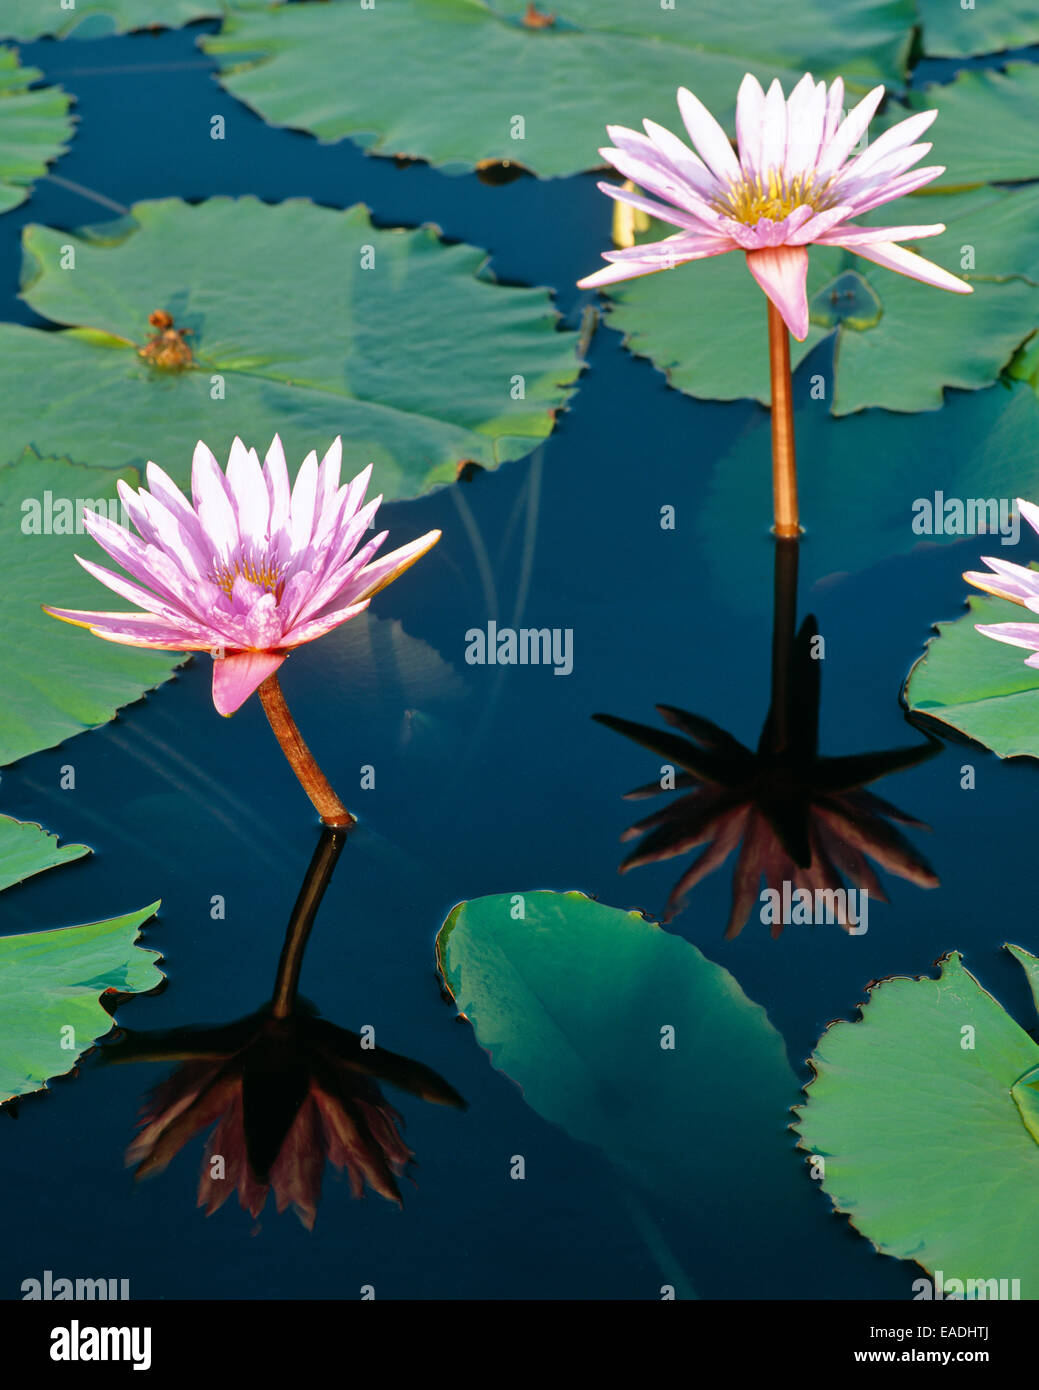 lotus flower and leaves in bloom in water garden Stock Photo